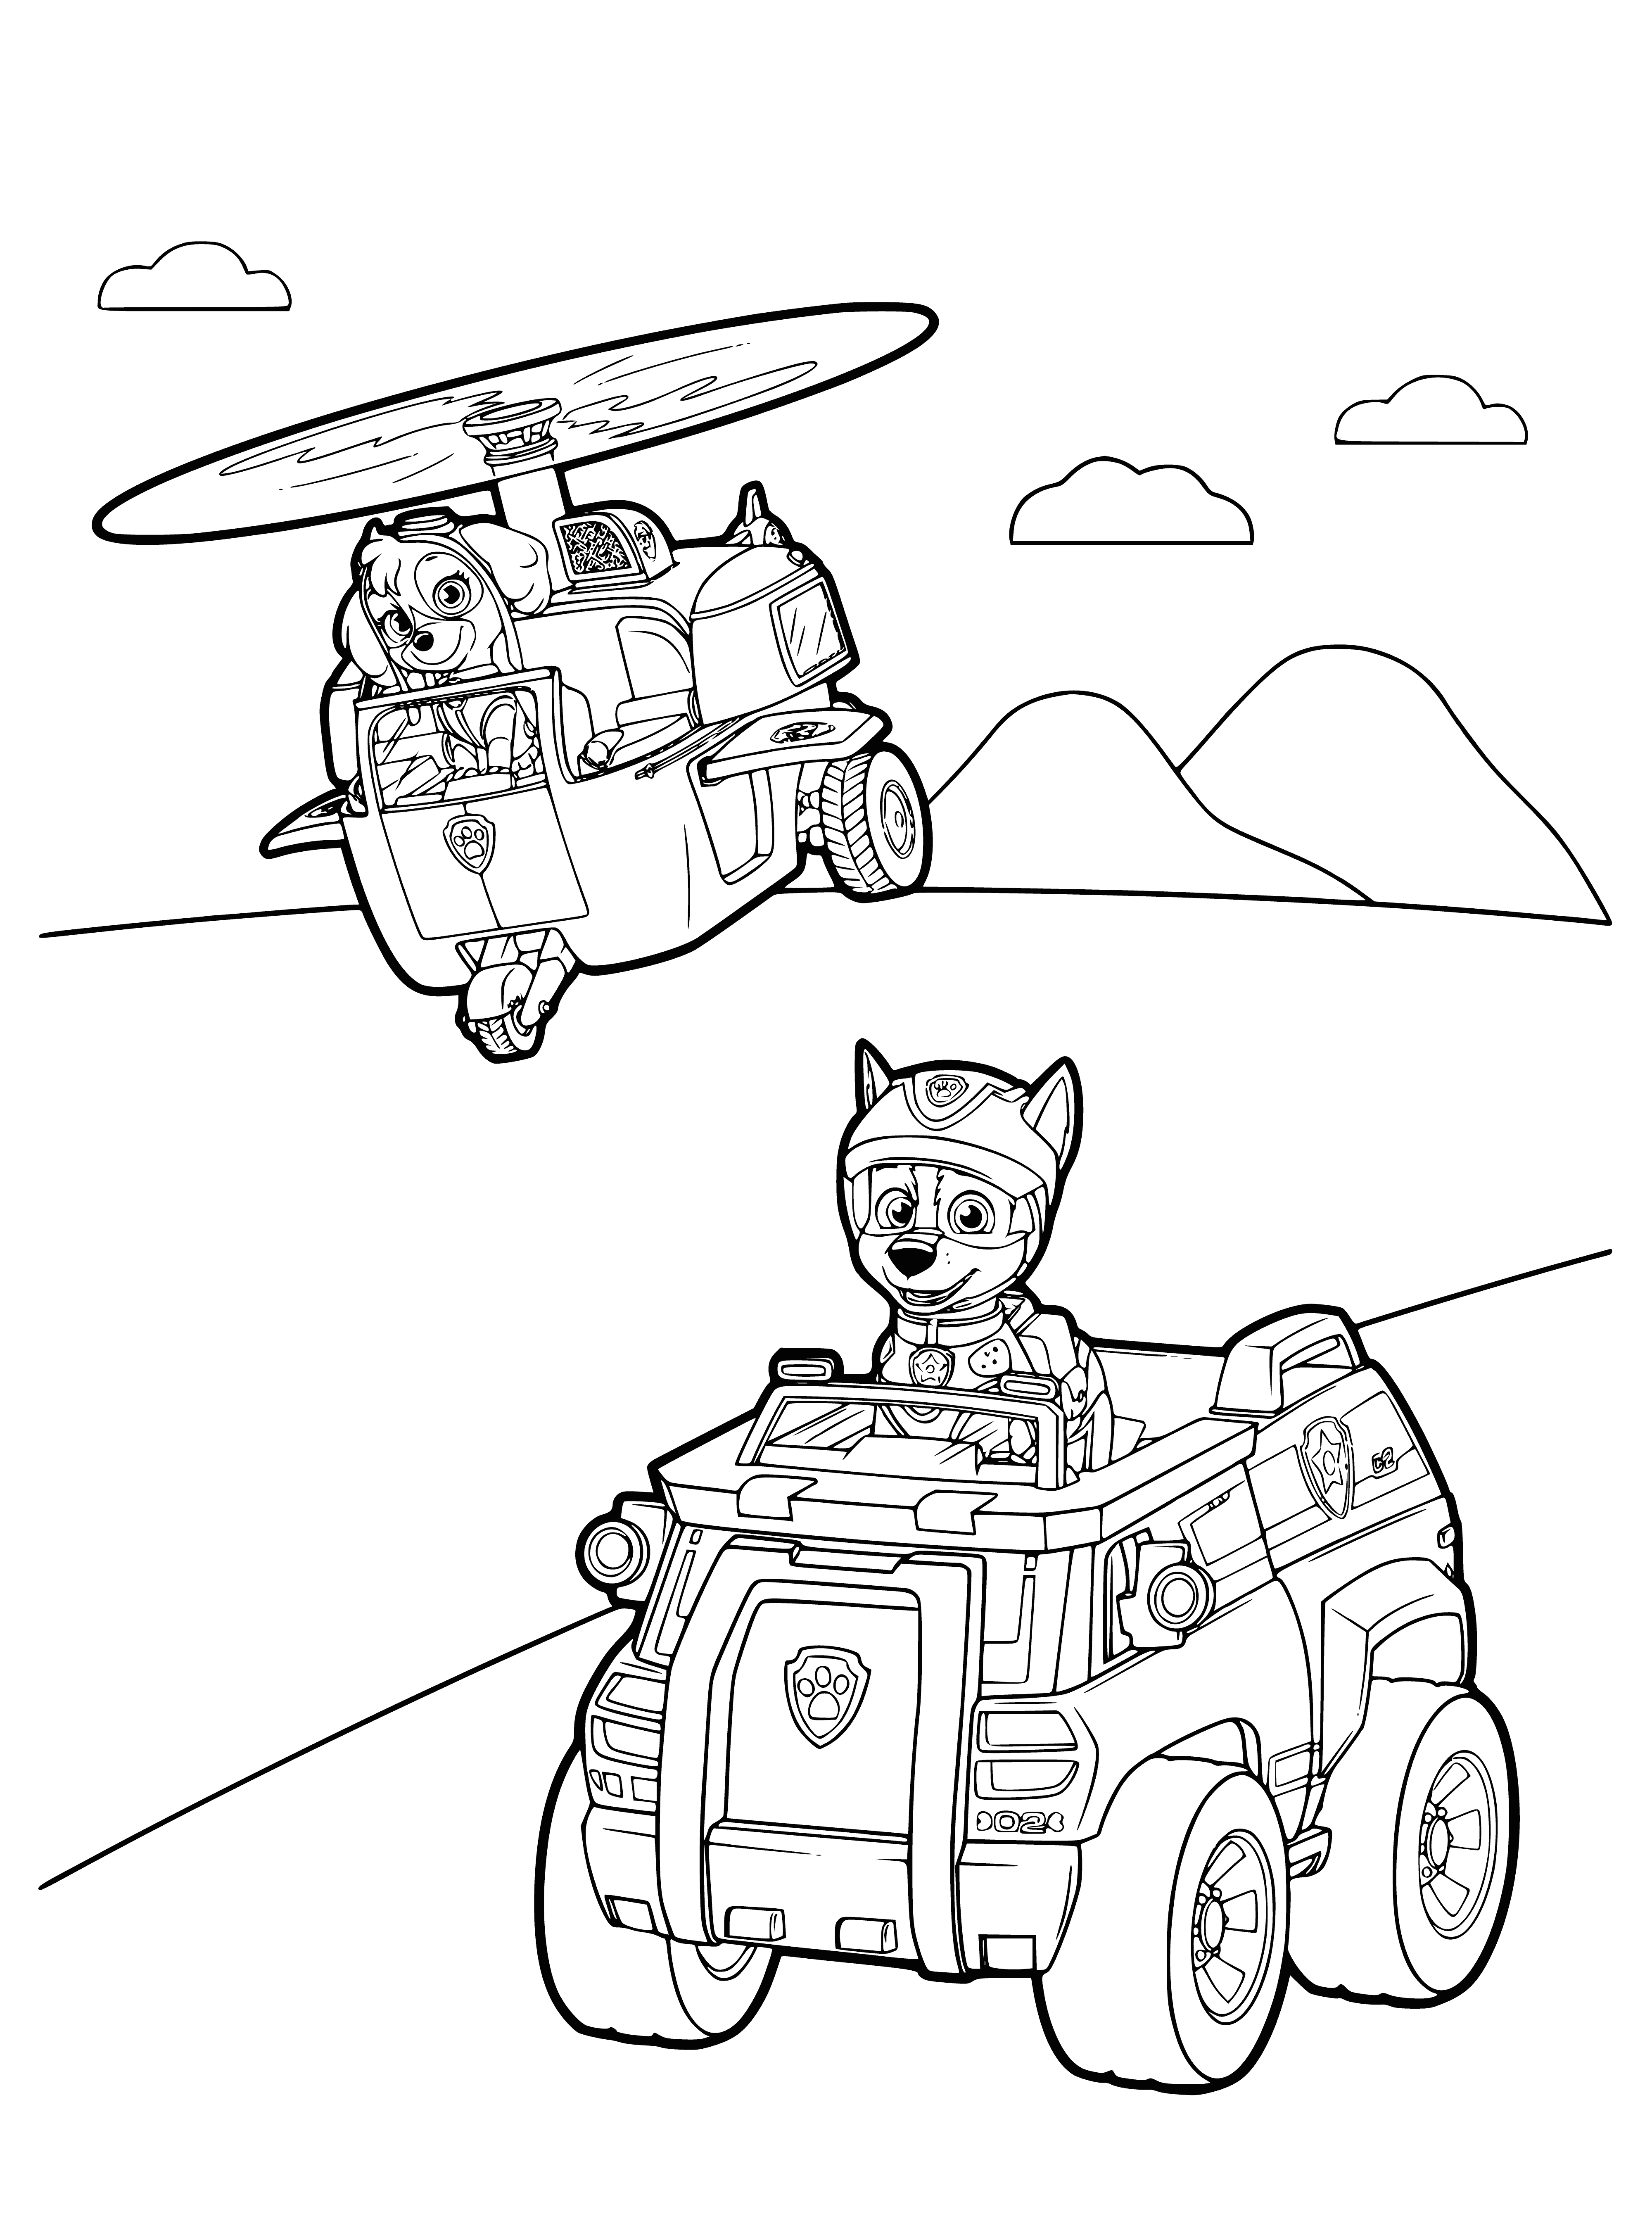 coloring page: PAW Patrol Transport is a large vehicle with a ramp, slide, and crane. It has "PAW Patrol" written on the side and windows. #pawpatrol